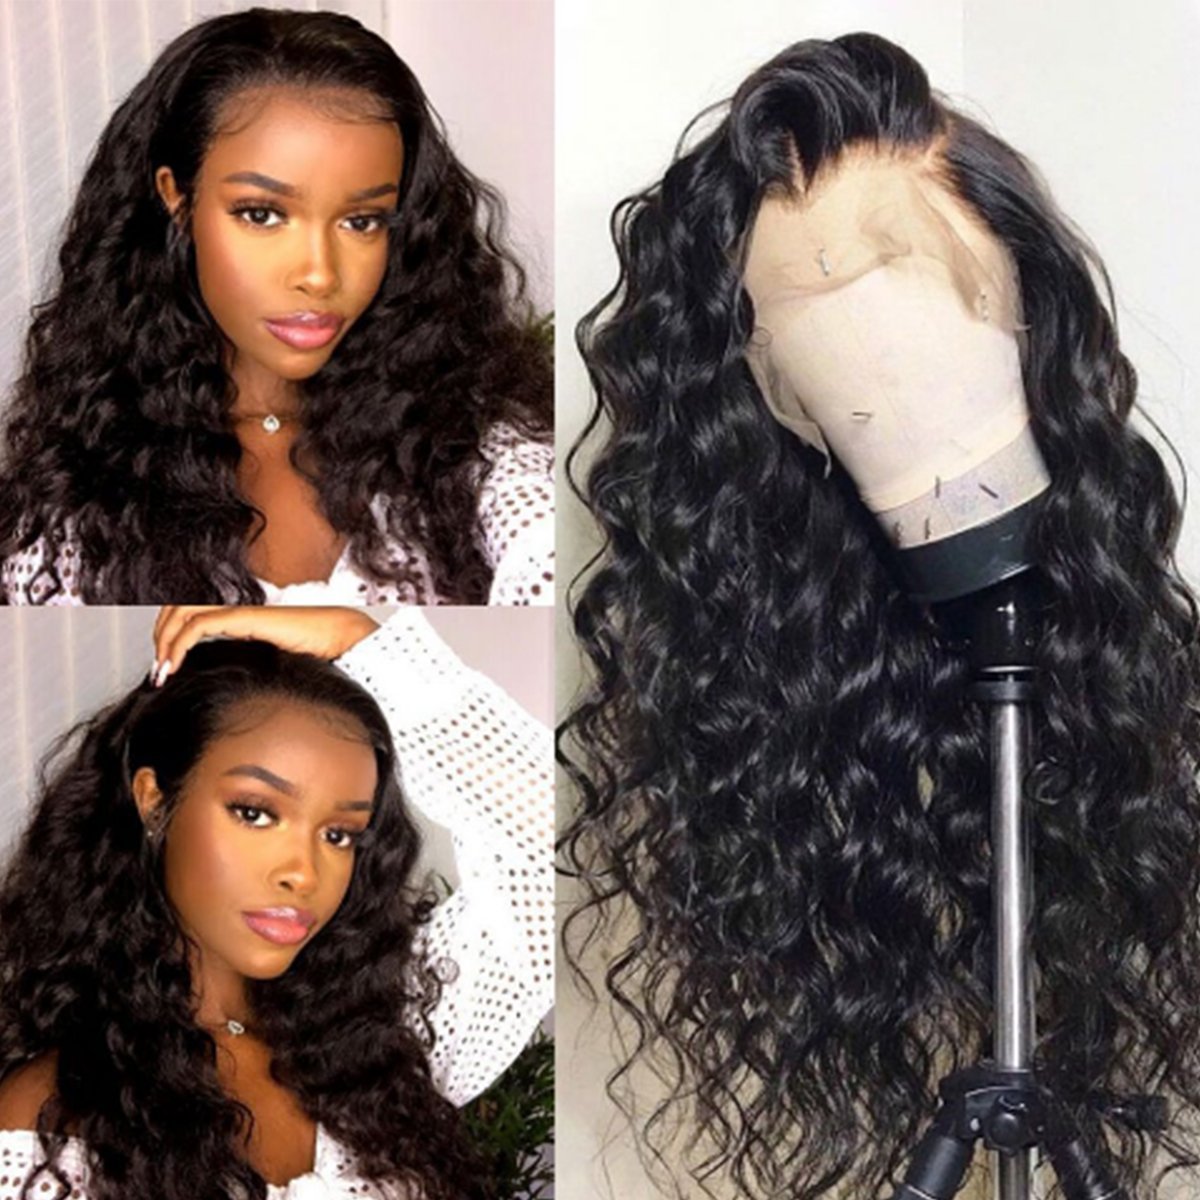 Remy Natural Hair Loose Deep Wave Transparent Lace Front Wigs |VSHOW HAIR